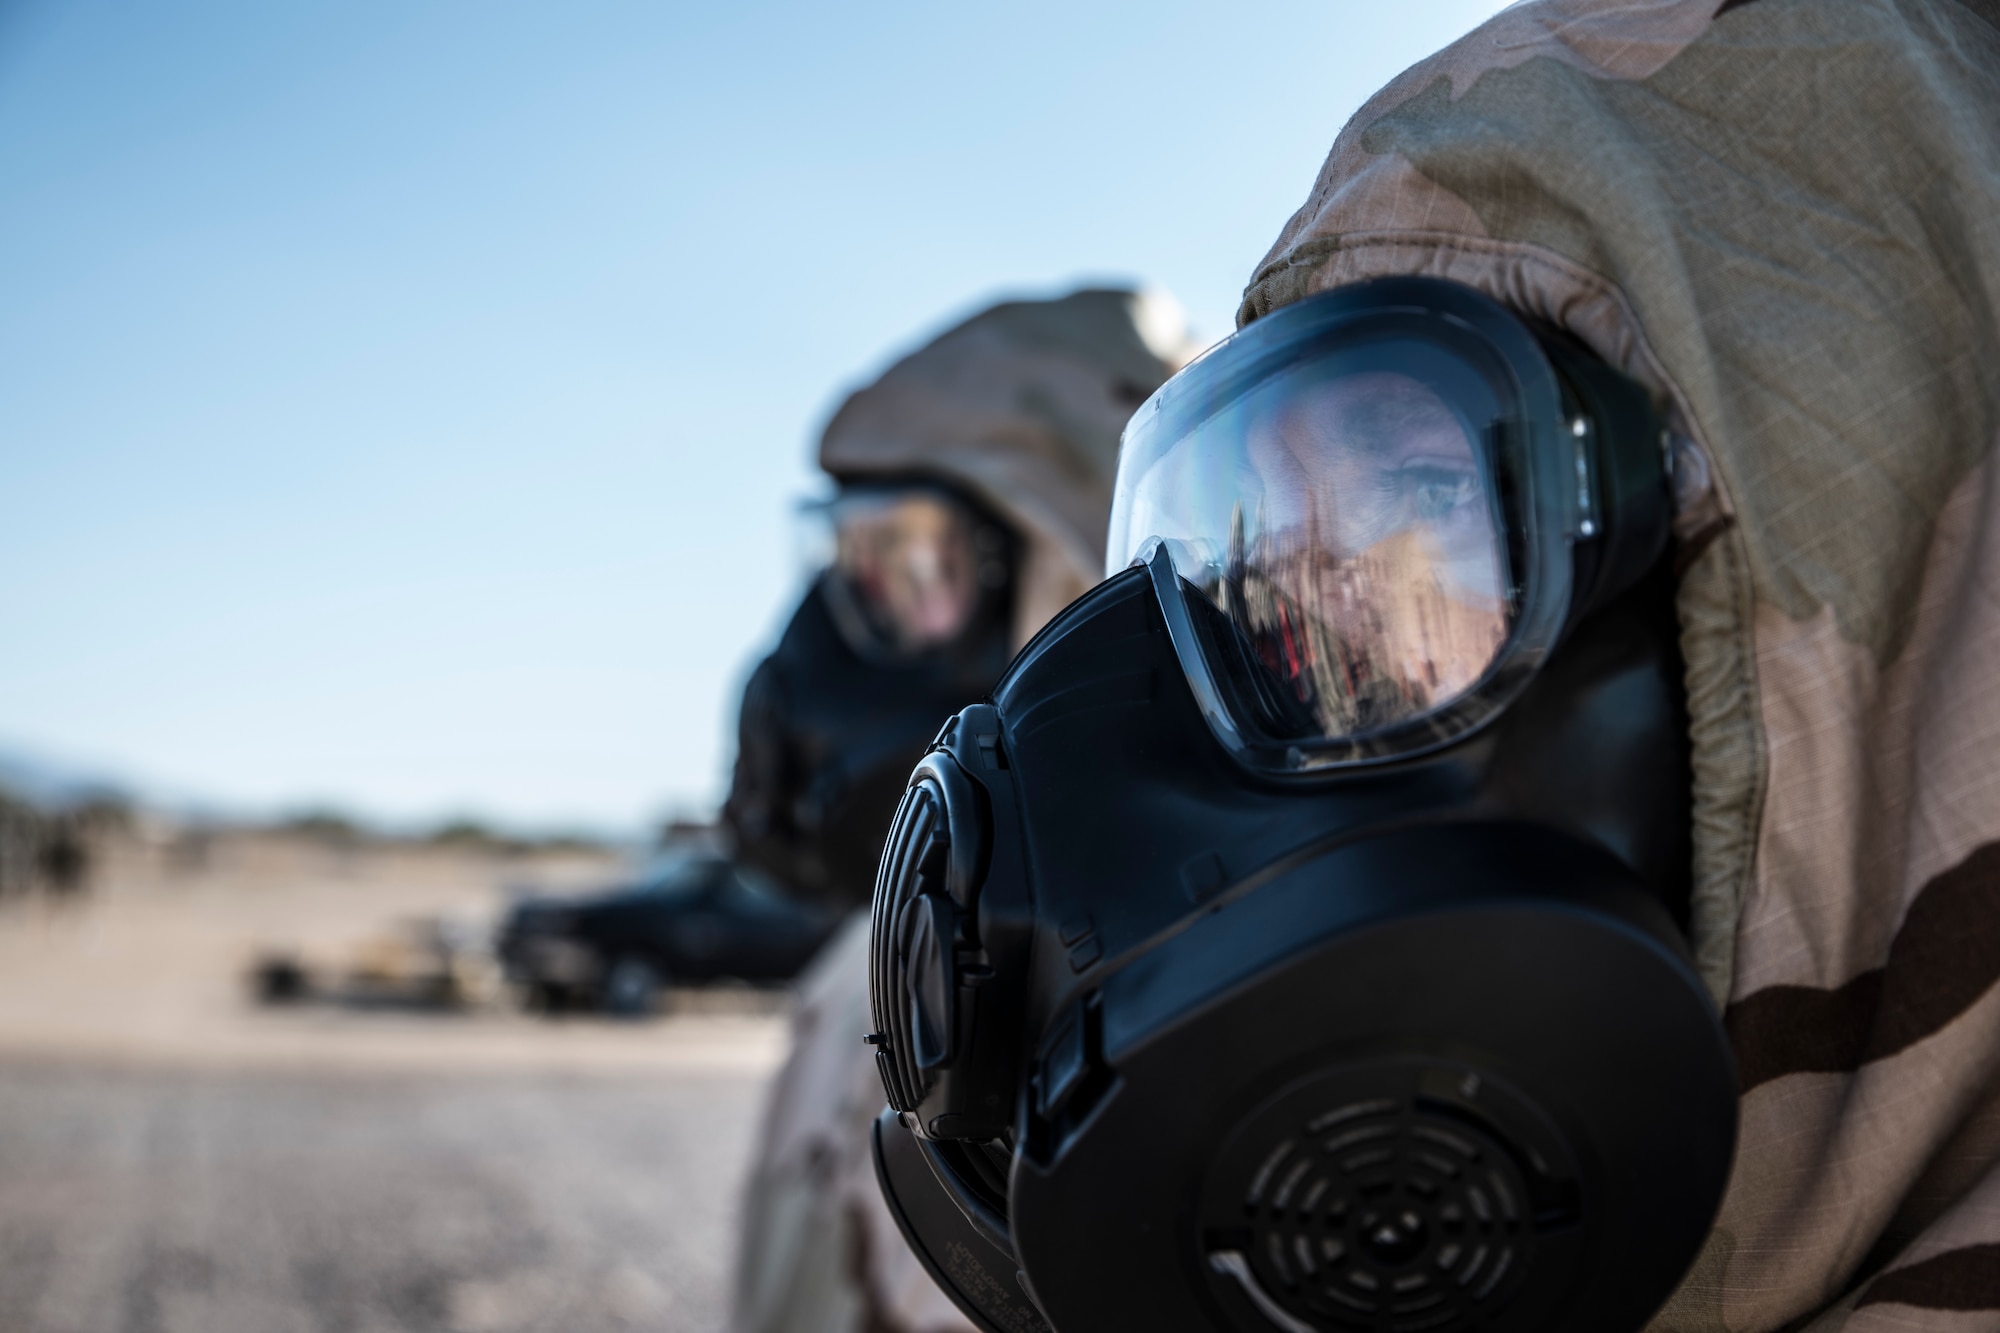 A photo of Airmen doing CBRNE training